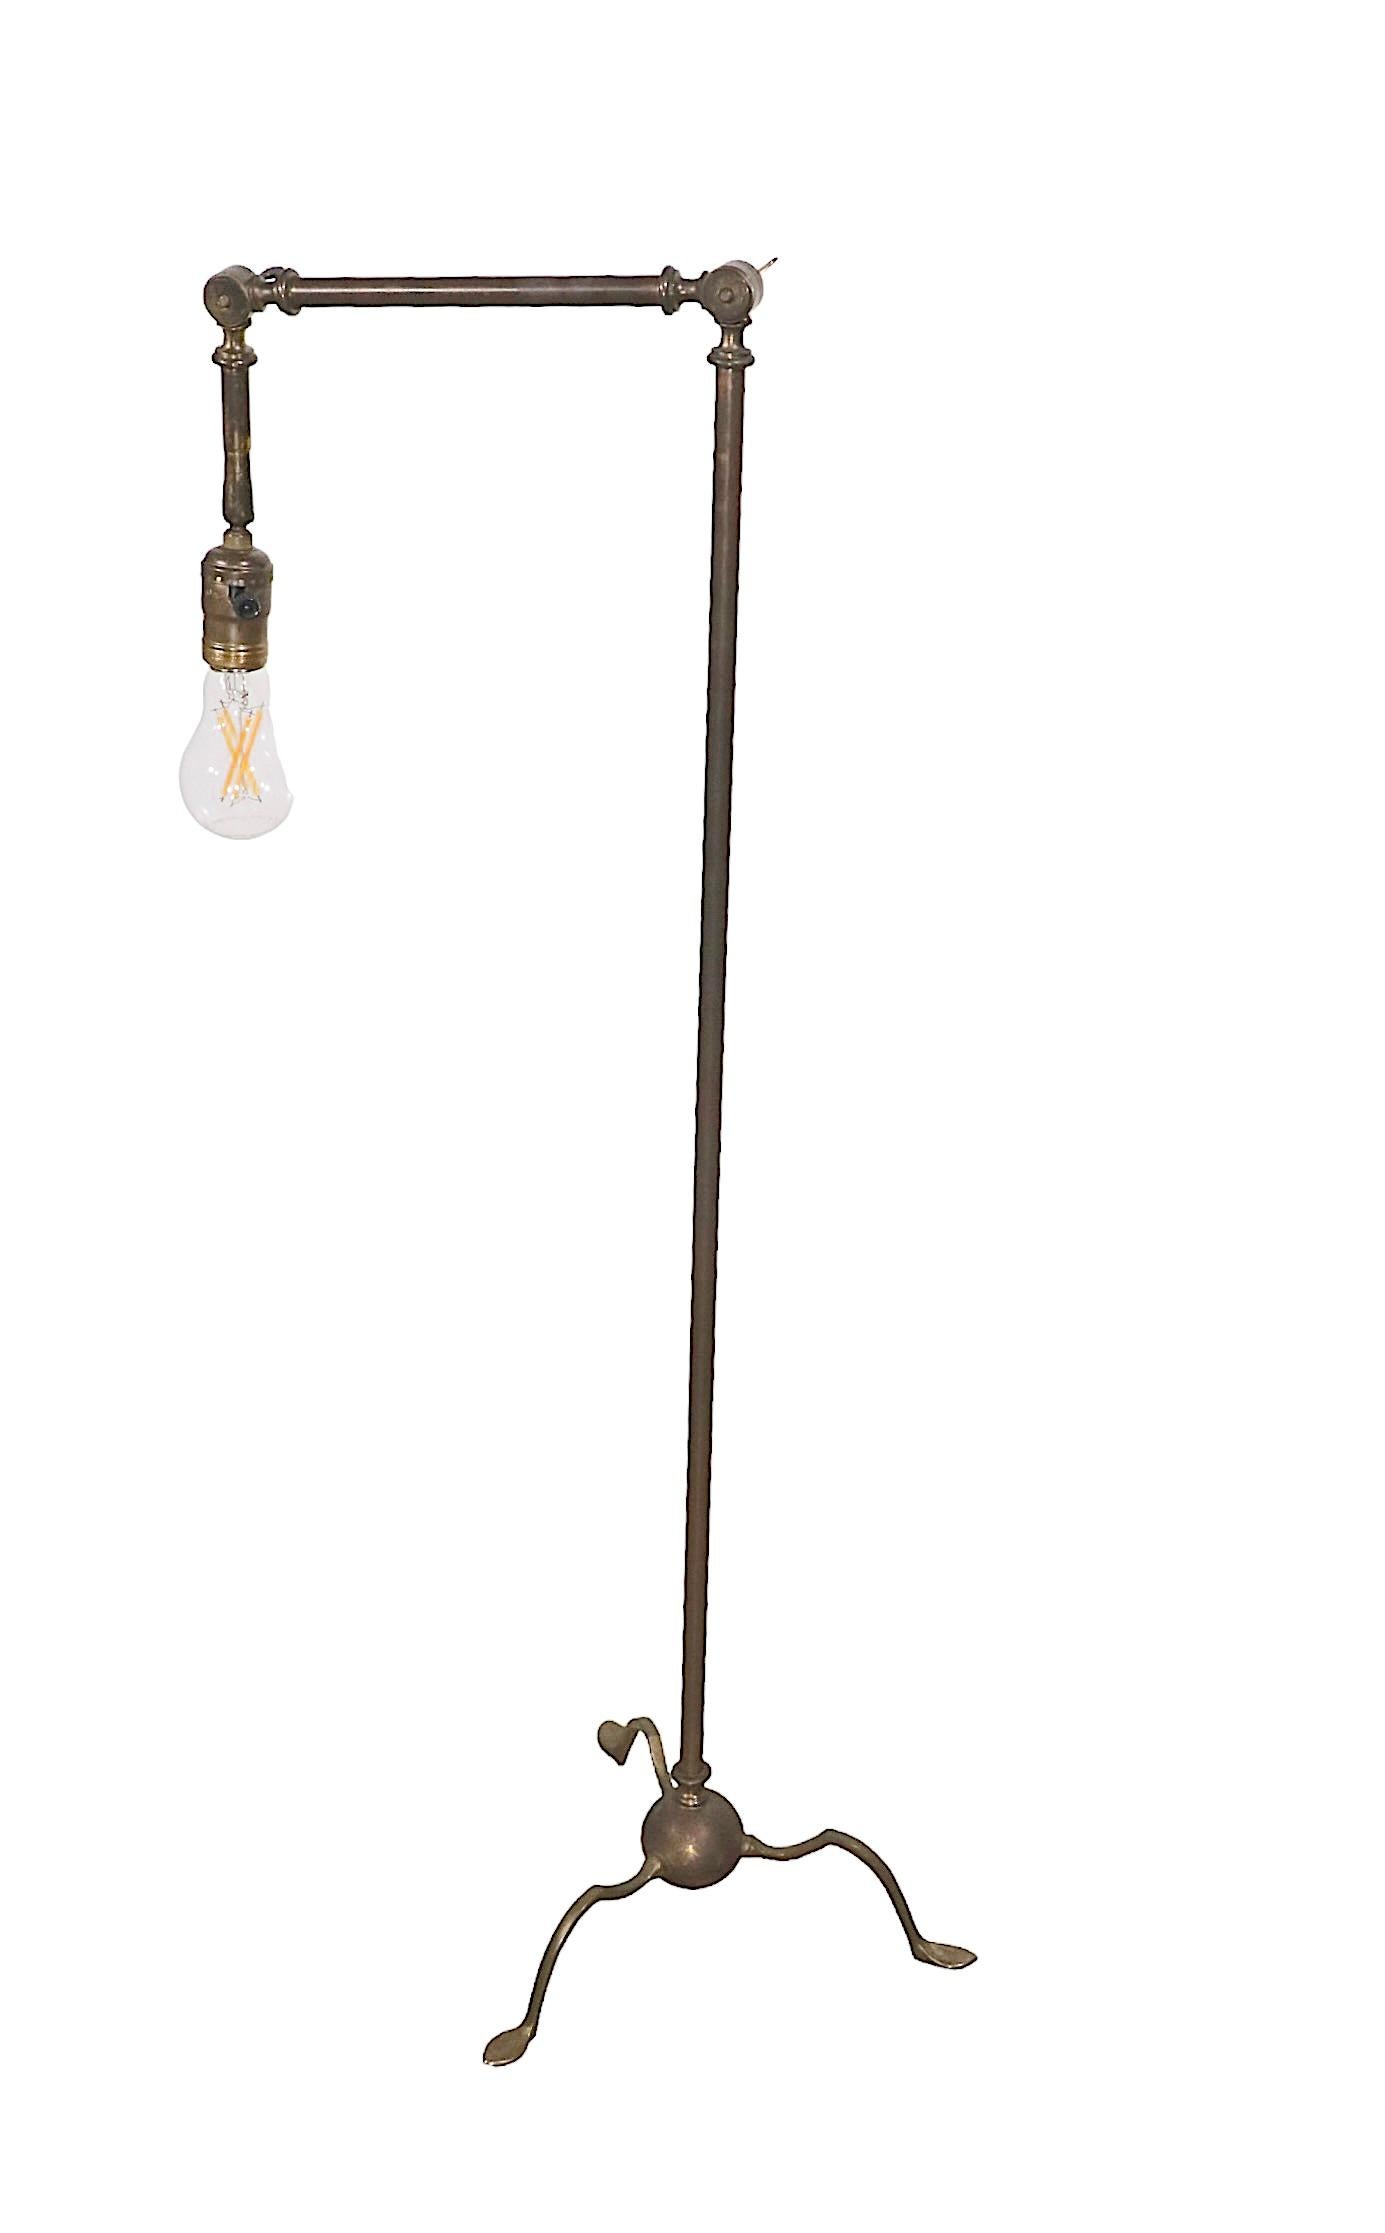 Articulating Brass Reading Floor Lamp in the Classical Style, C. 1900- 1930's For Sale 7